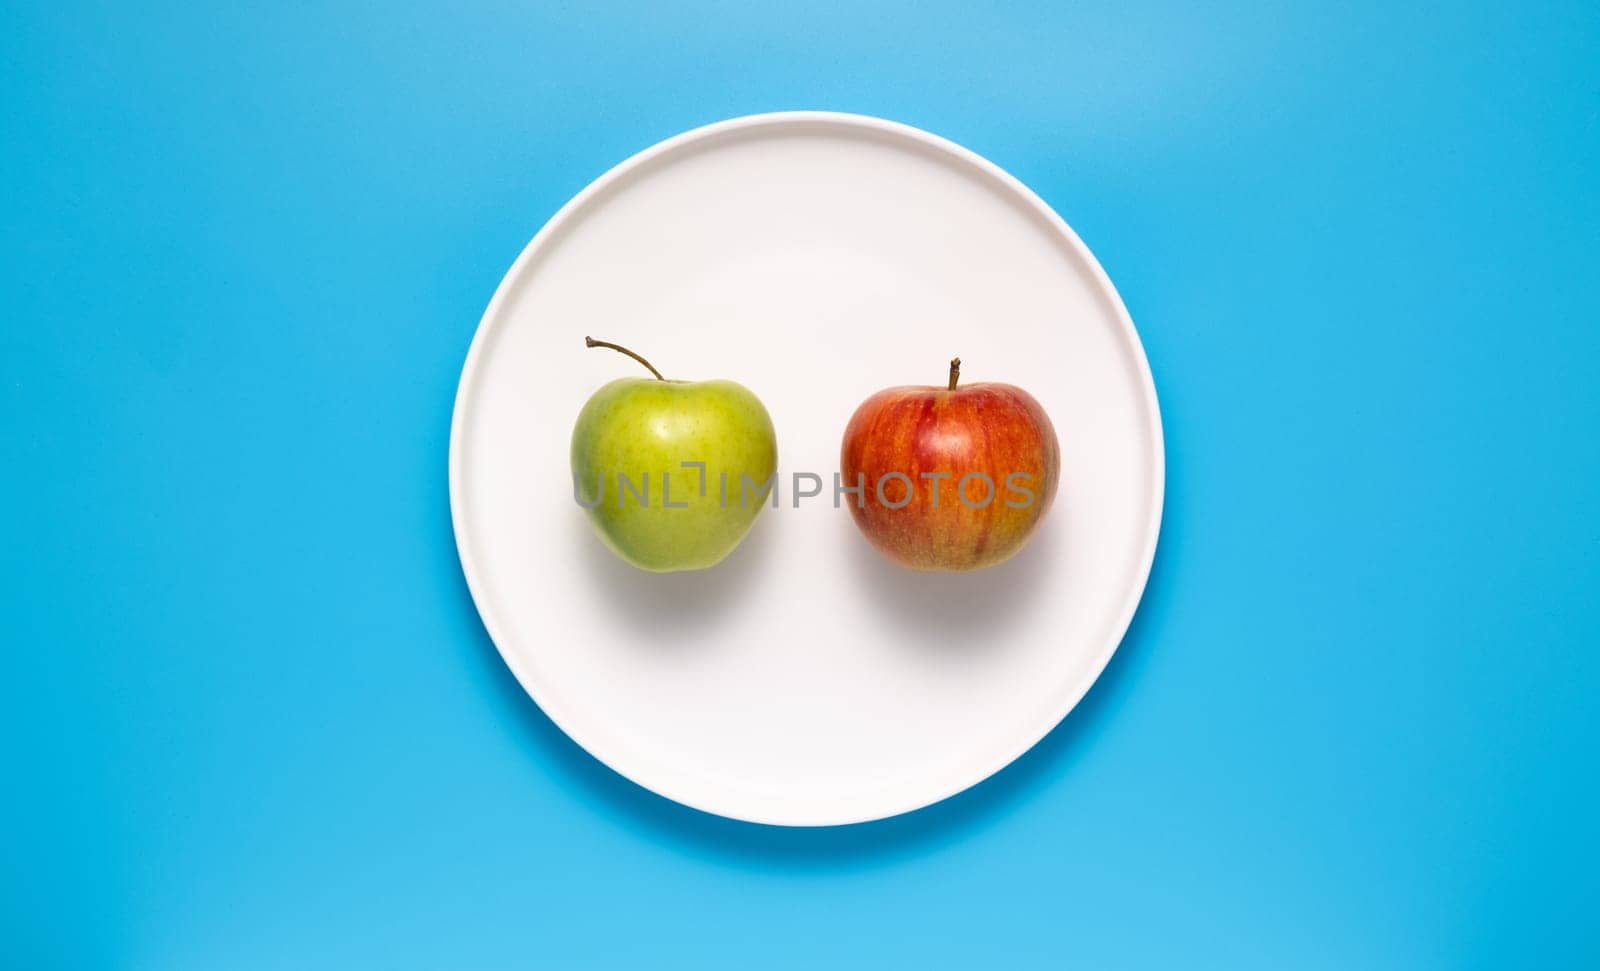 Red and green apple on a white plate on a blue background.